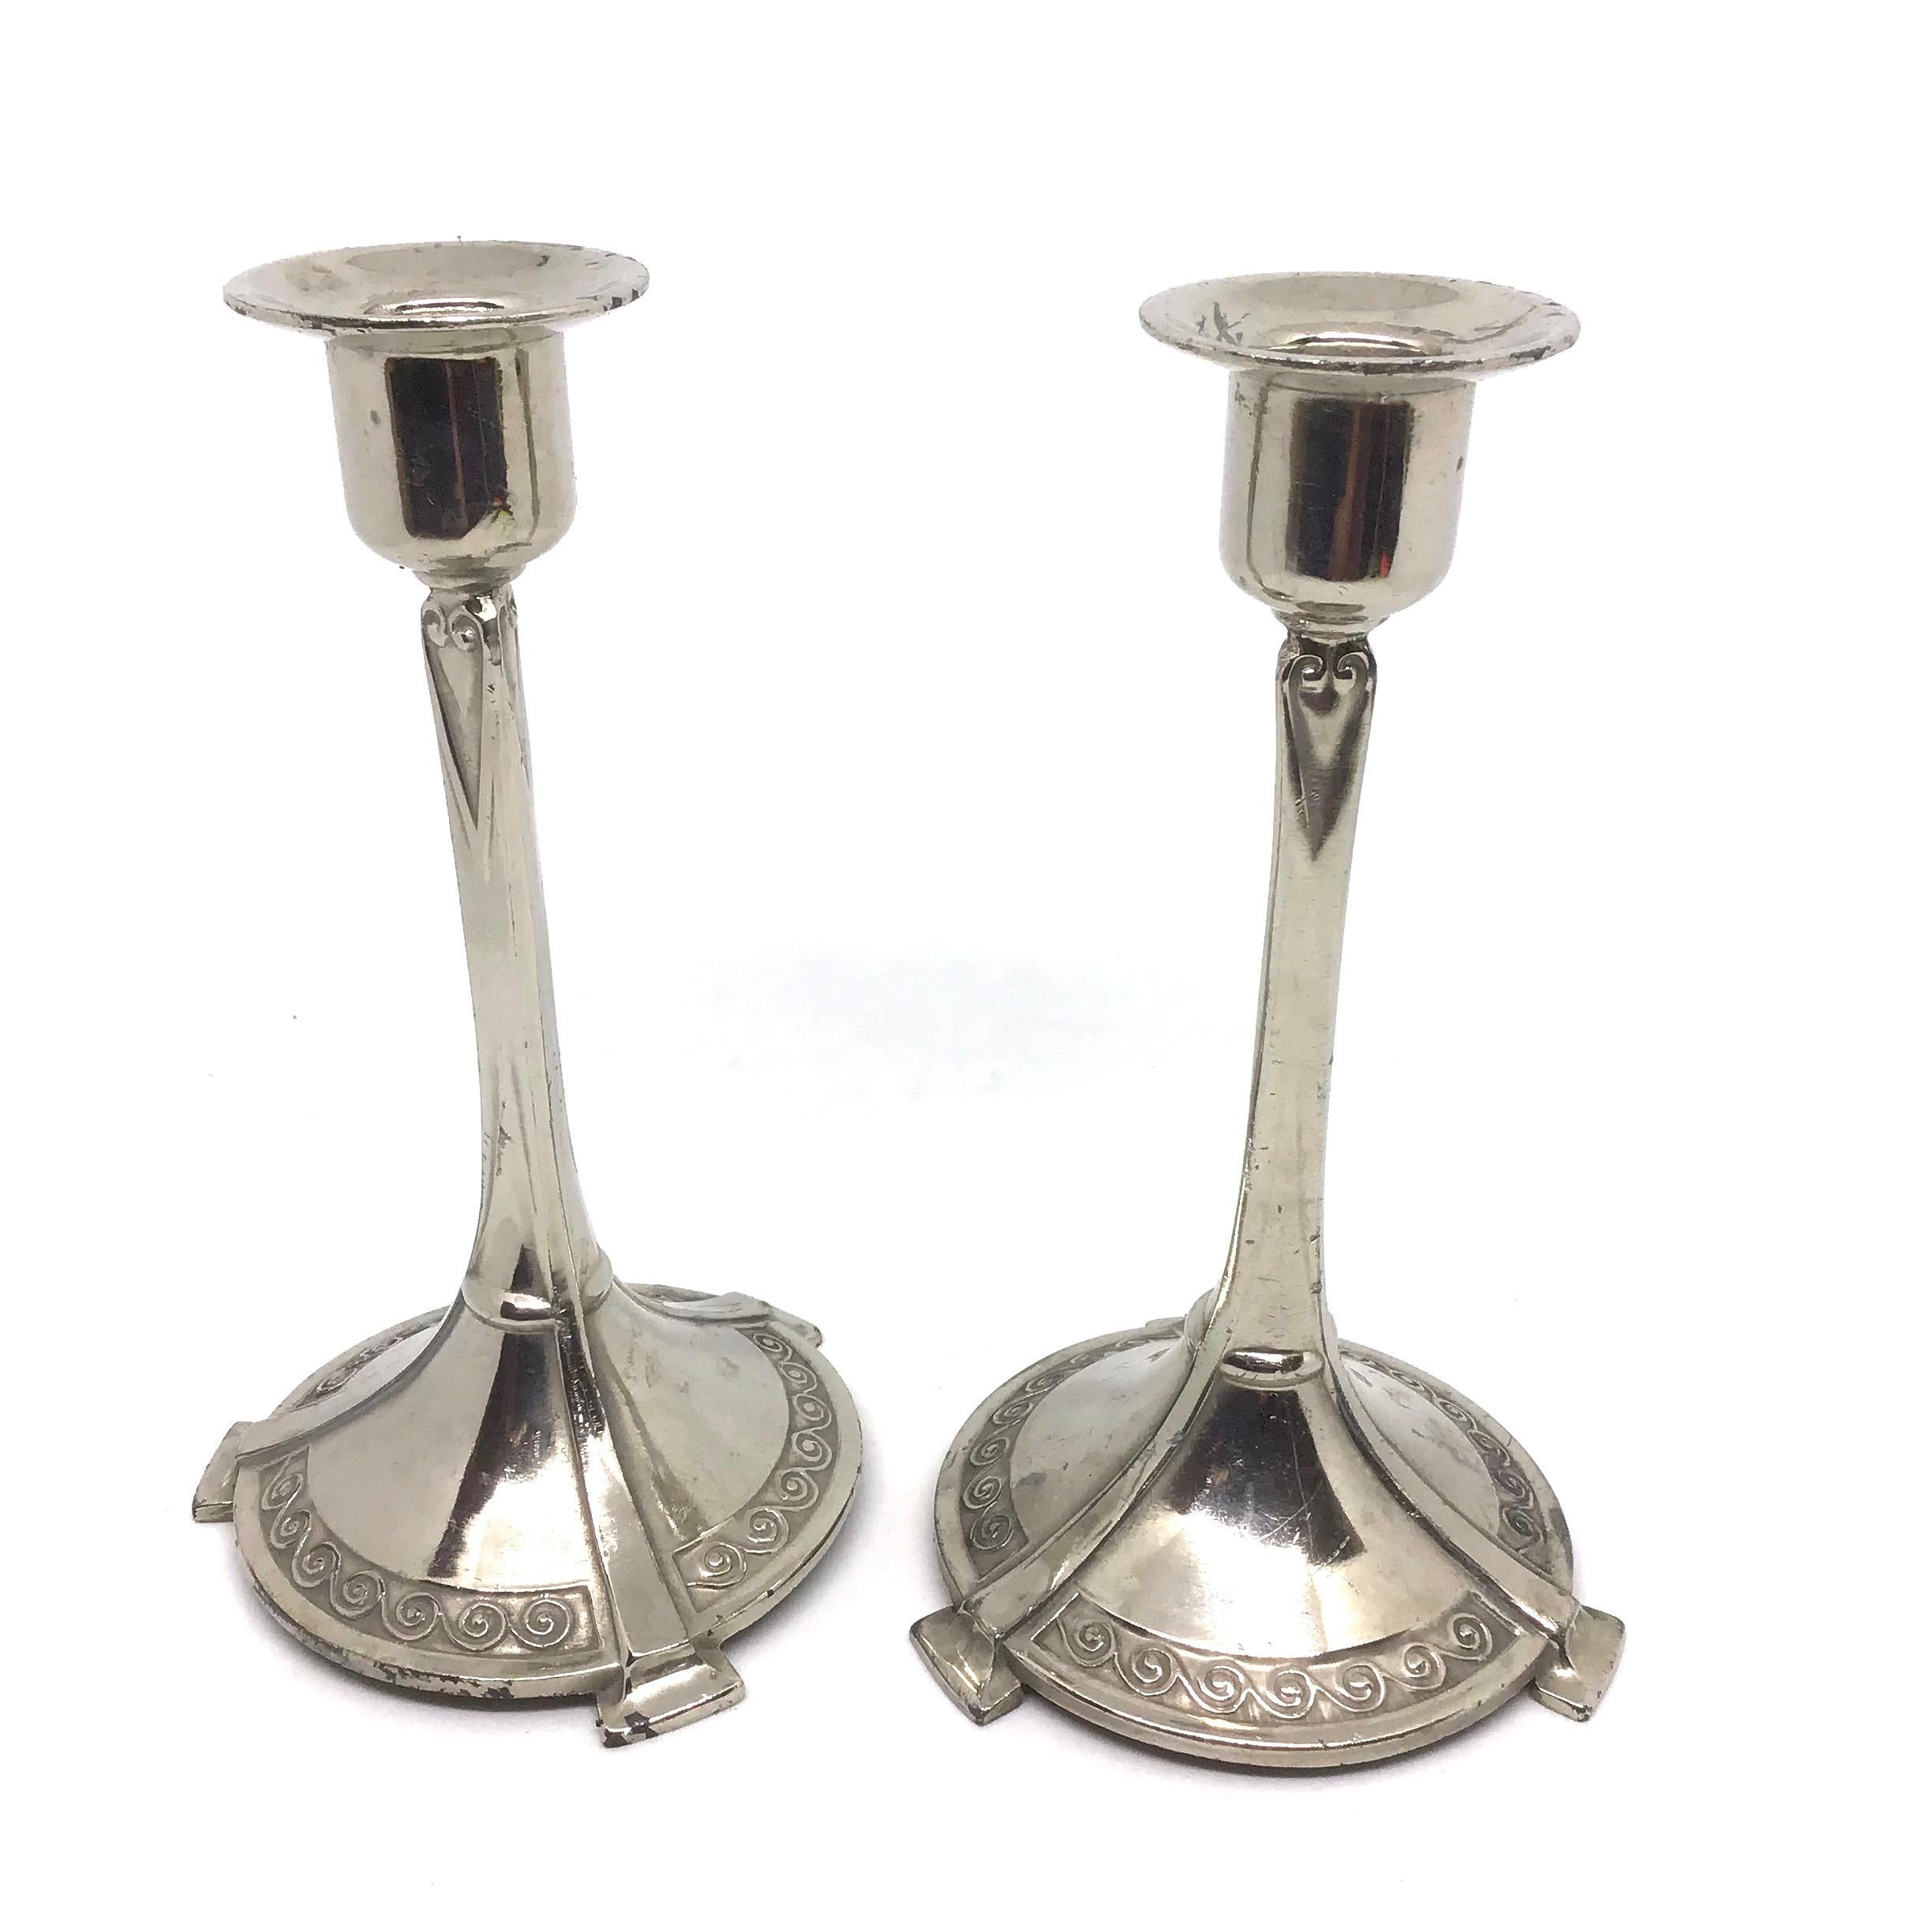 Very rare set of two Art Nouveau nickel-plated candlesticks, Germany, 1900s. They have a very nice patina. A decorative addition to any room.